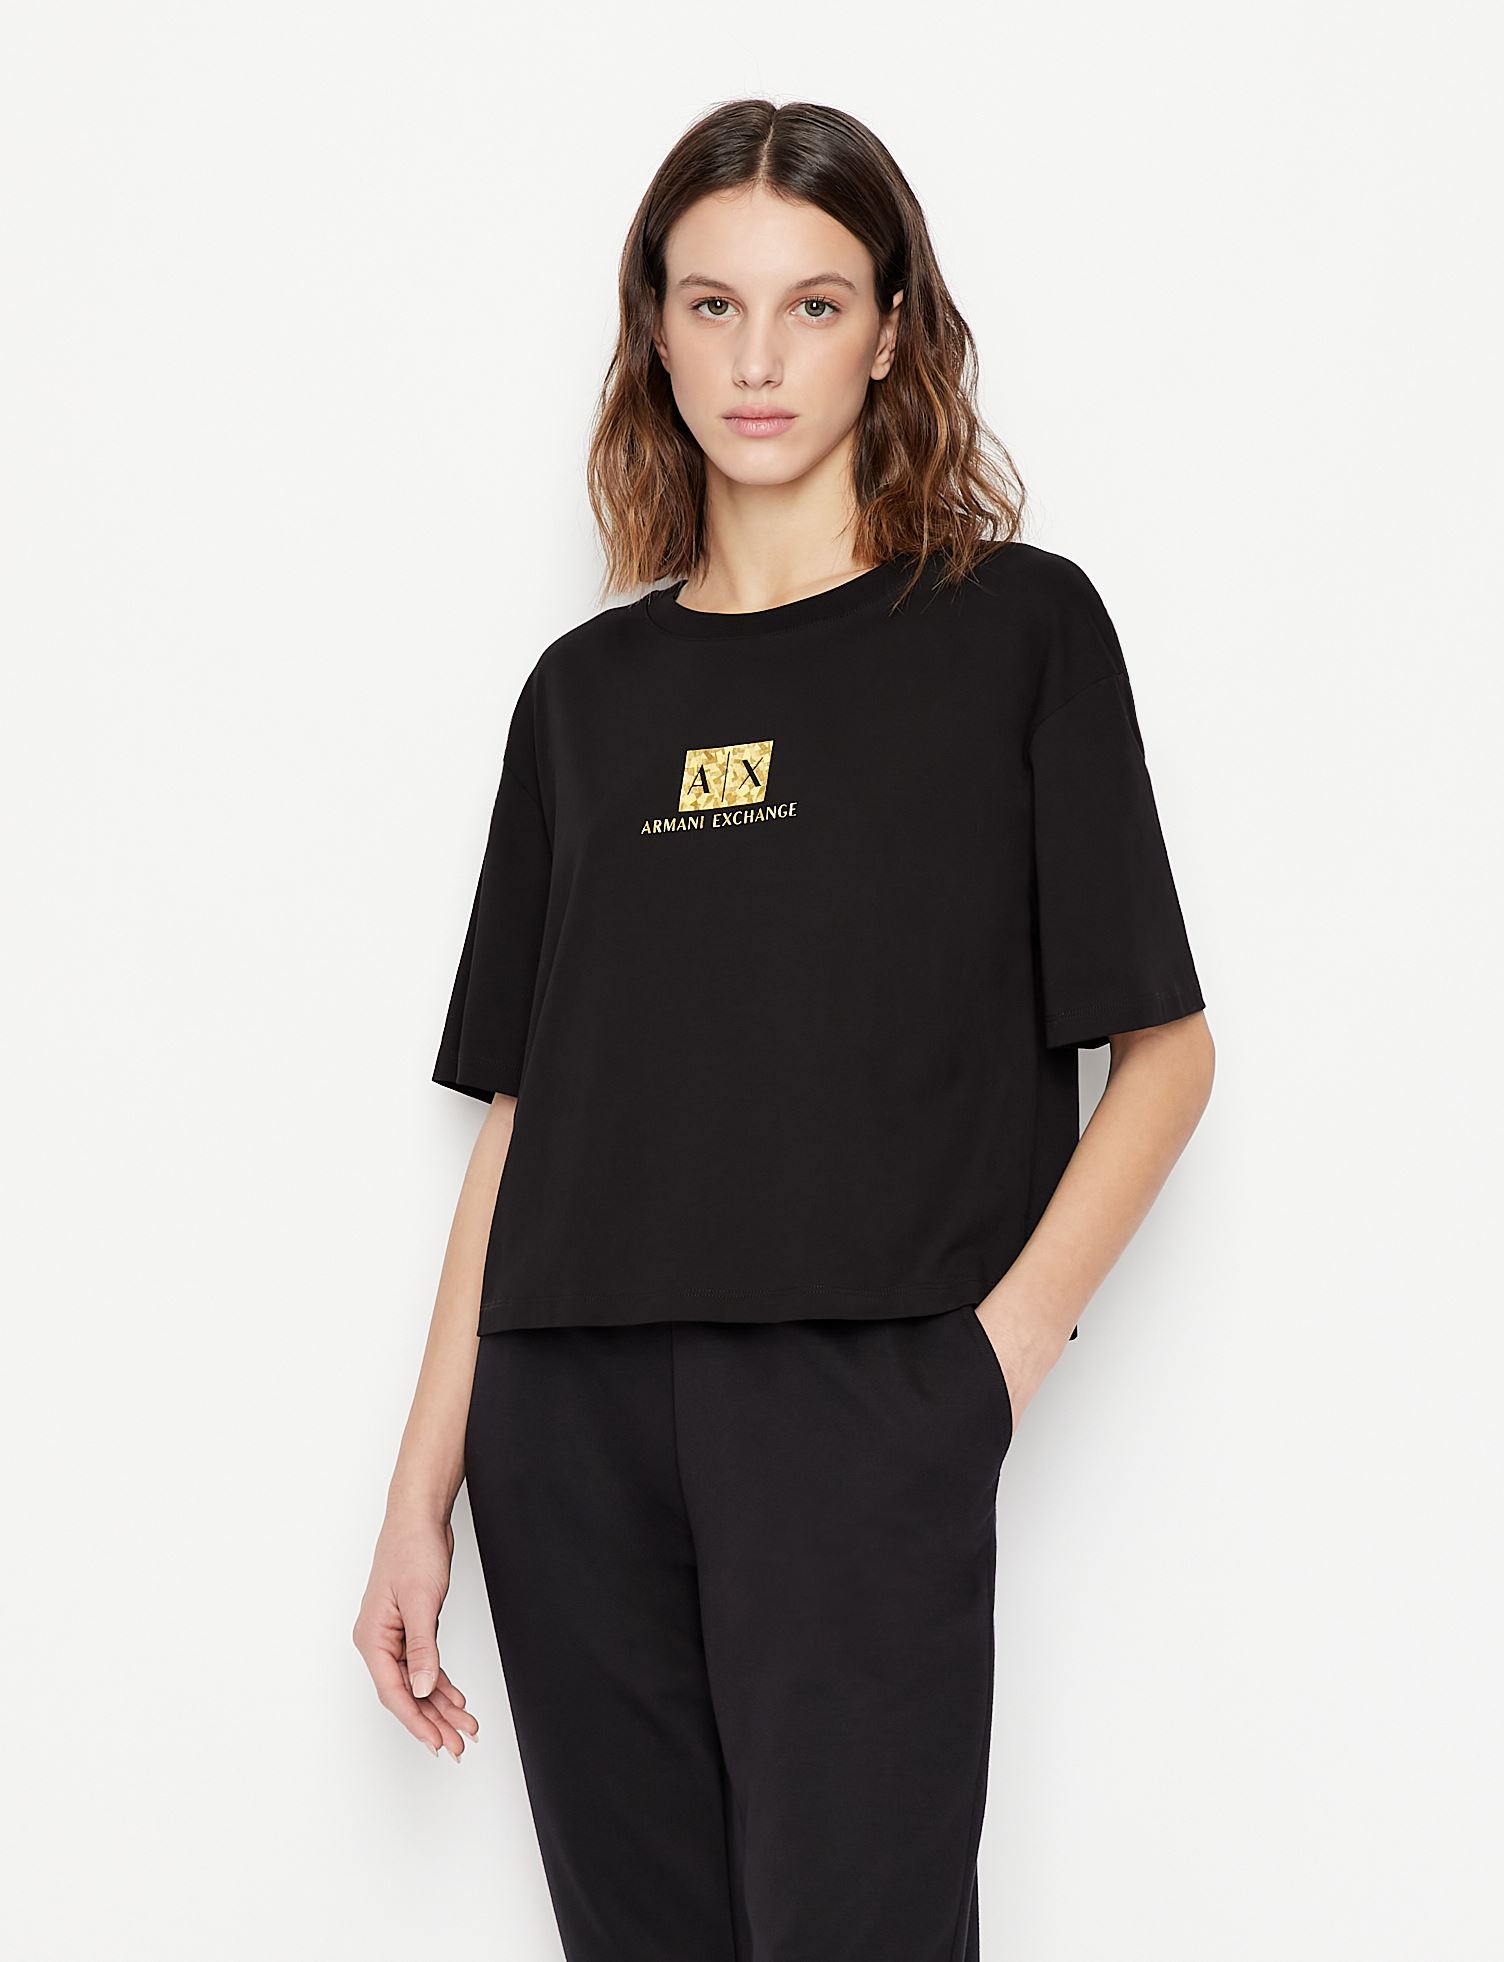 CROPPED COTTON T-SHIRT - Time Square Trading Co., Ltd.